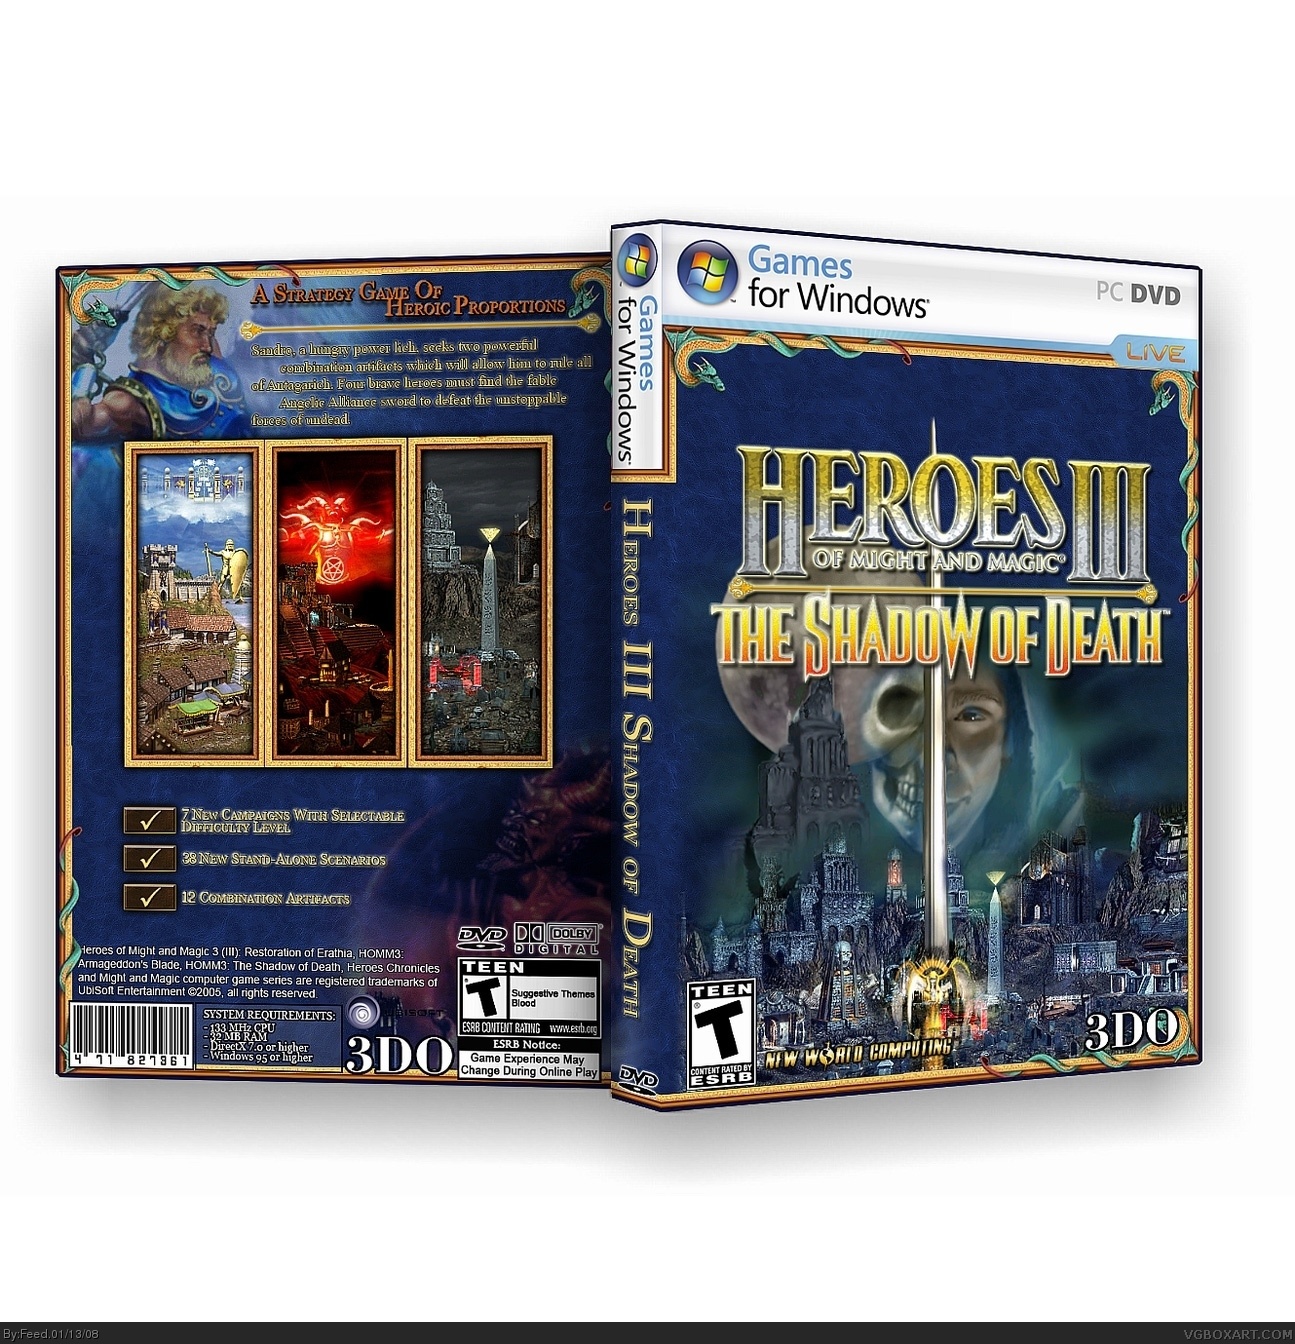 Heroes Of Might And Magic III: Shadow of Death box cover